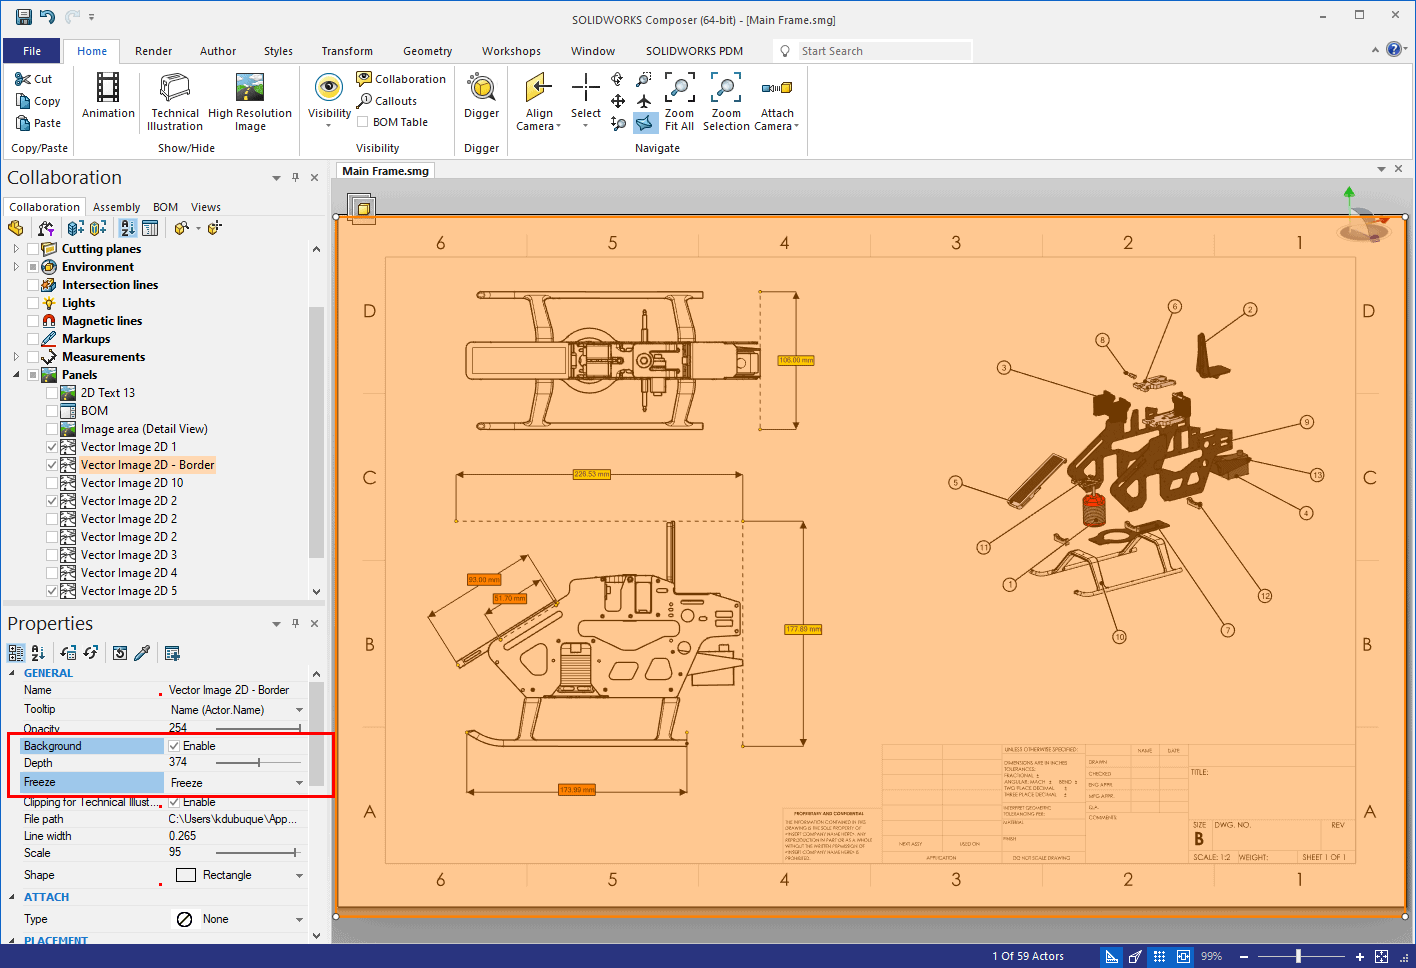 emulate drawiings solidworks composer, Emulating Drawings in SOLIDWORKS Composer?